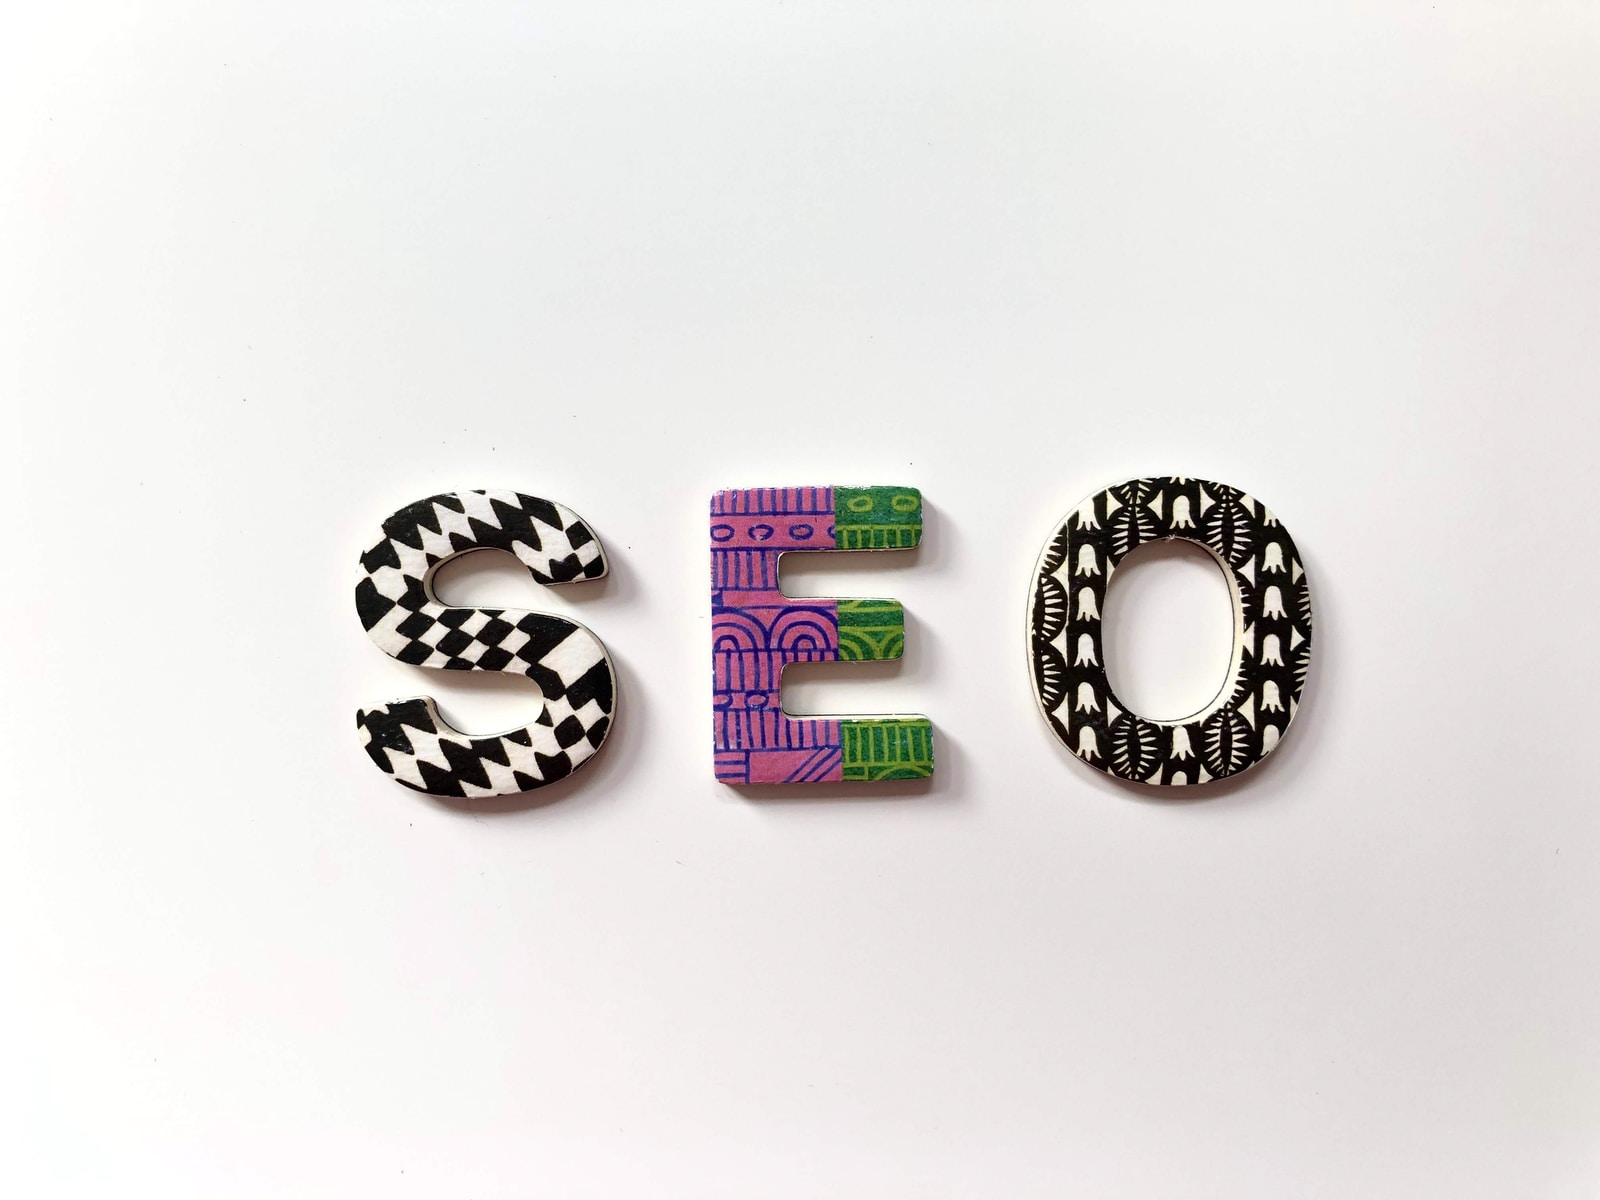 20 Most Important Questions About SEO